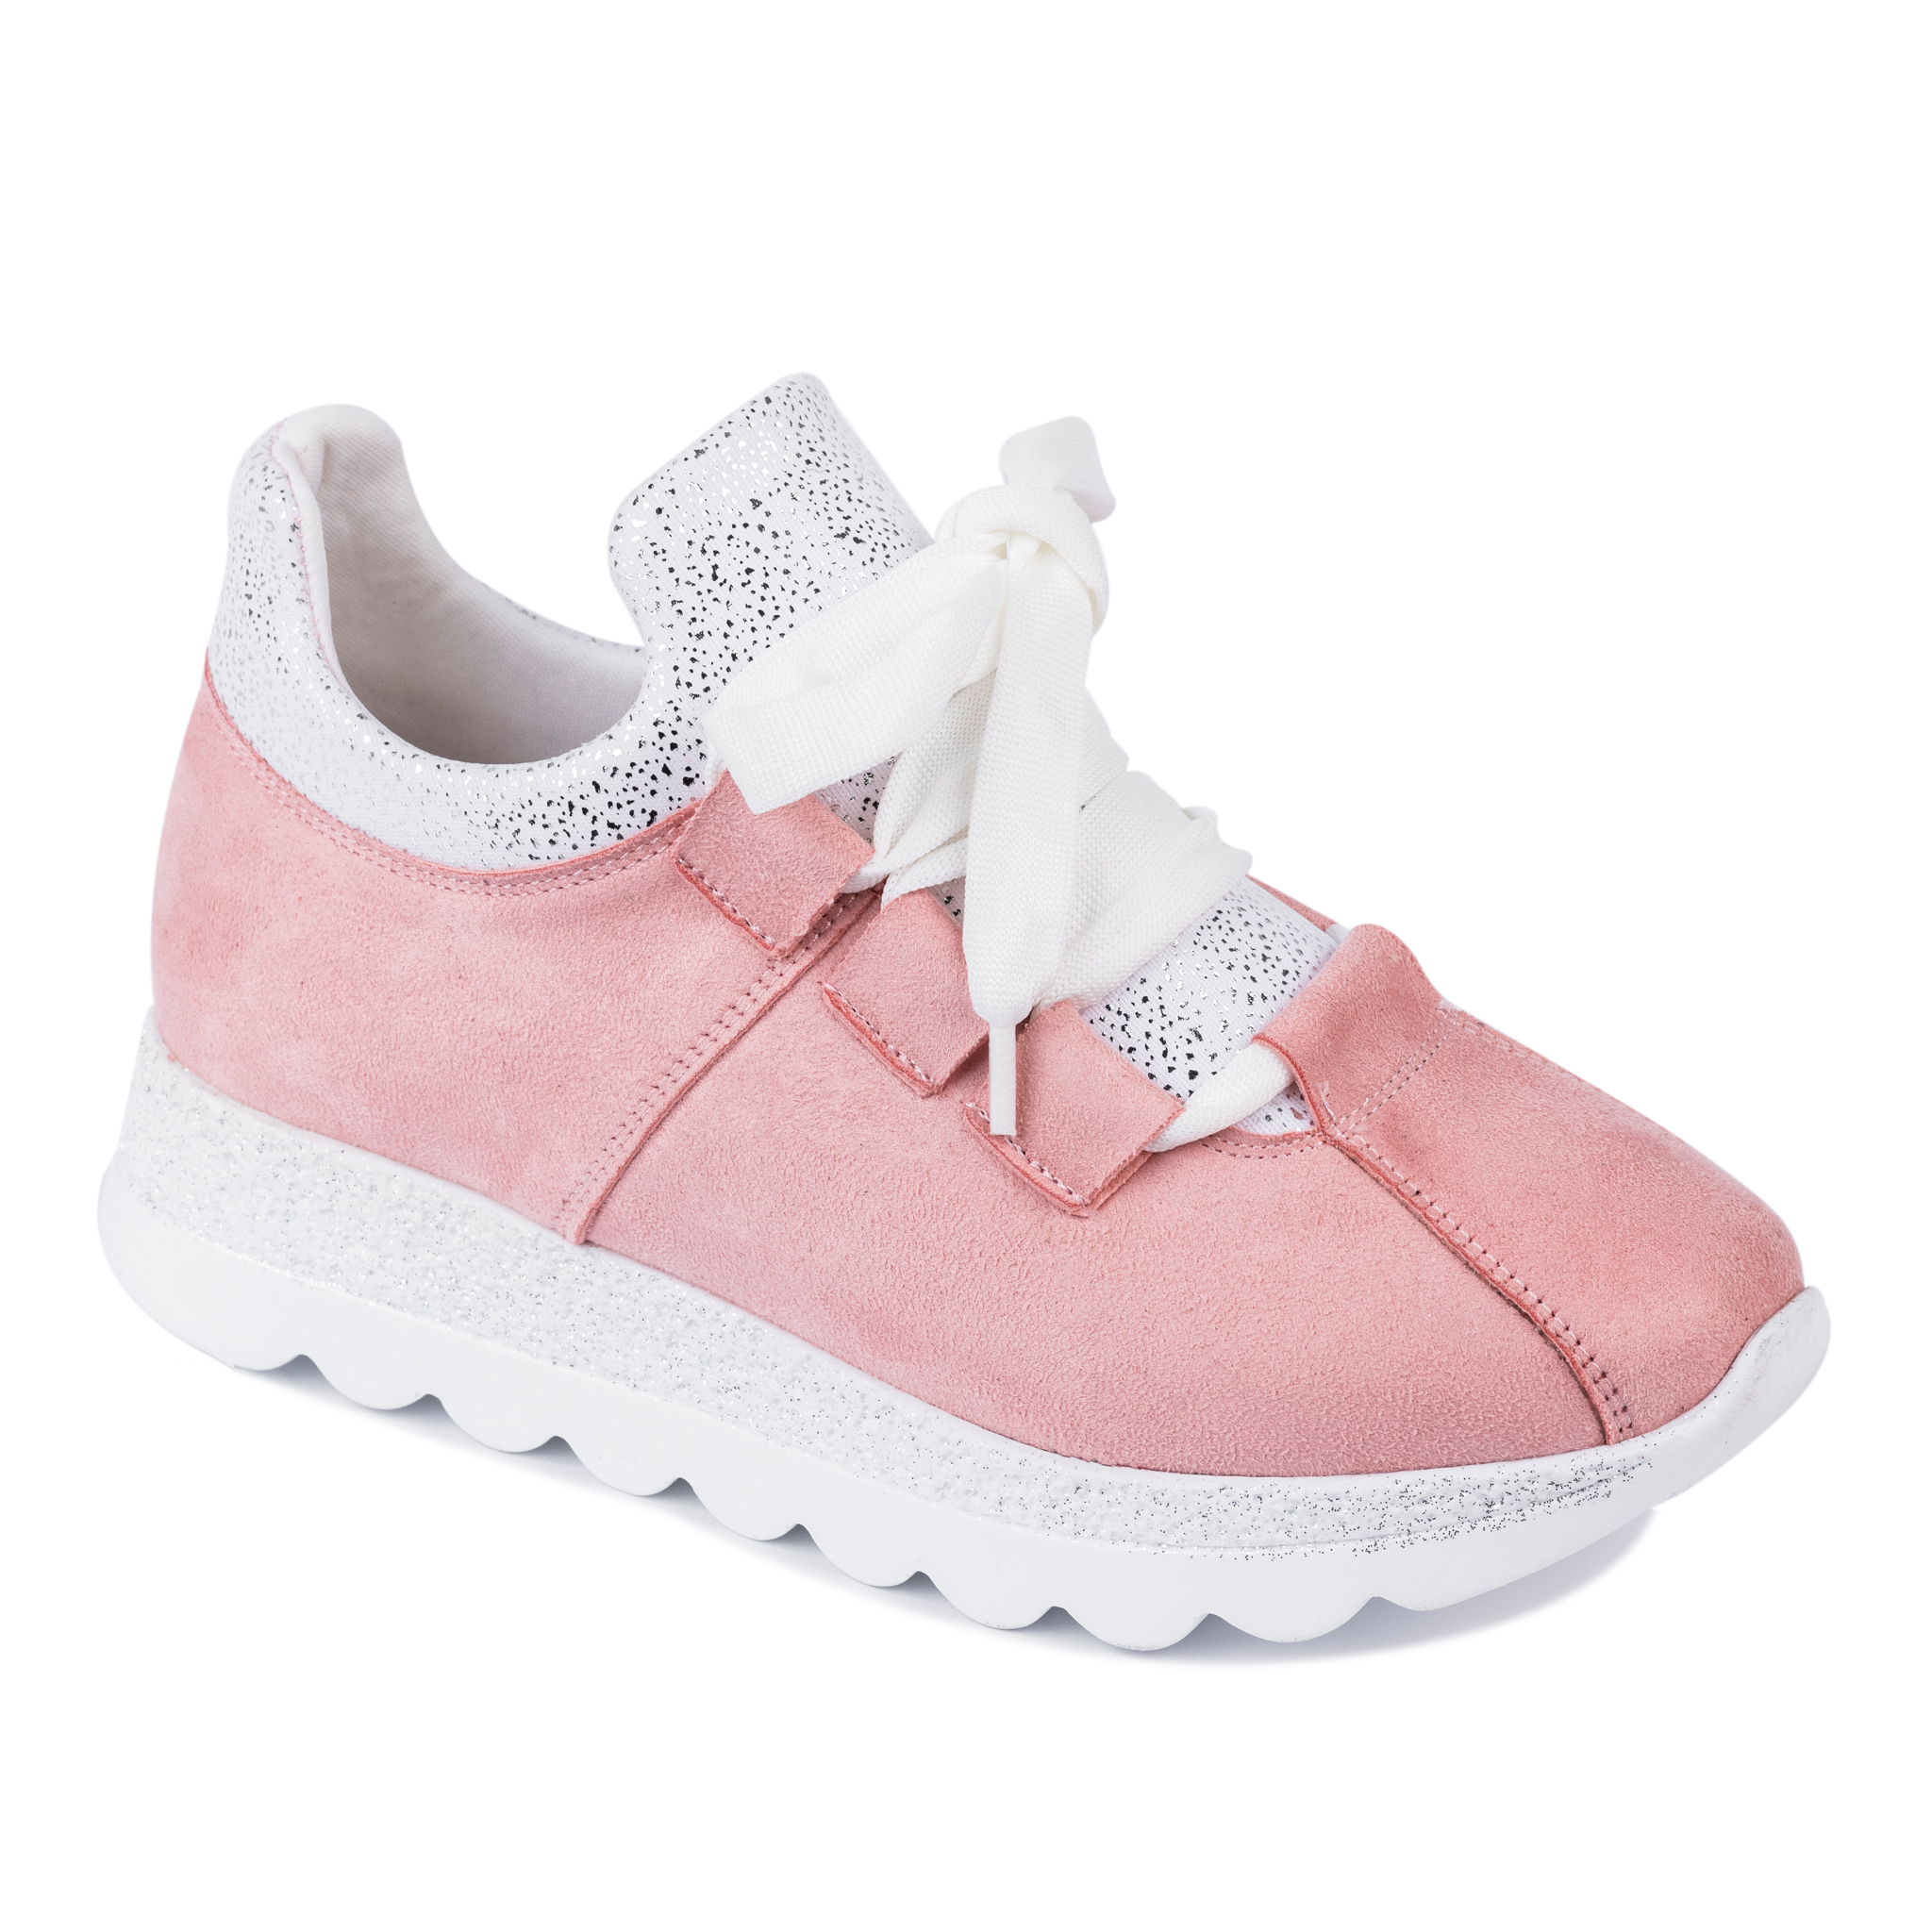 STRASS SNEAKERS - ROSE